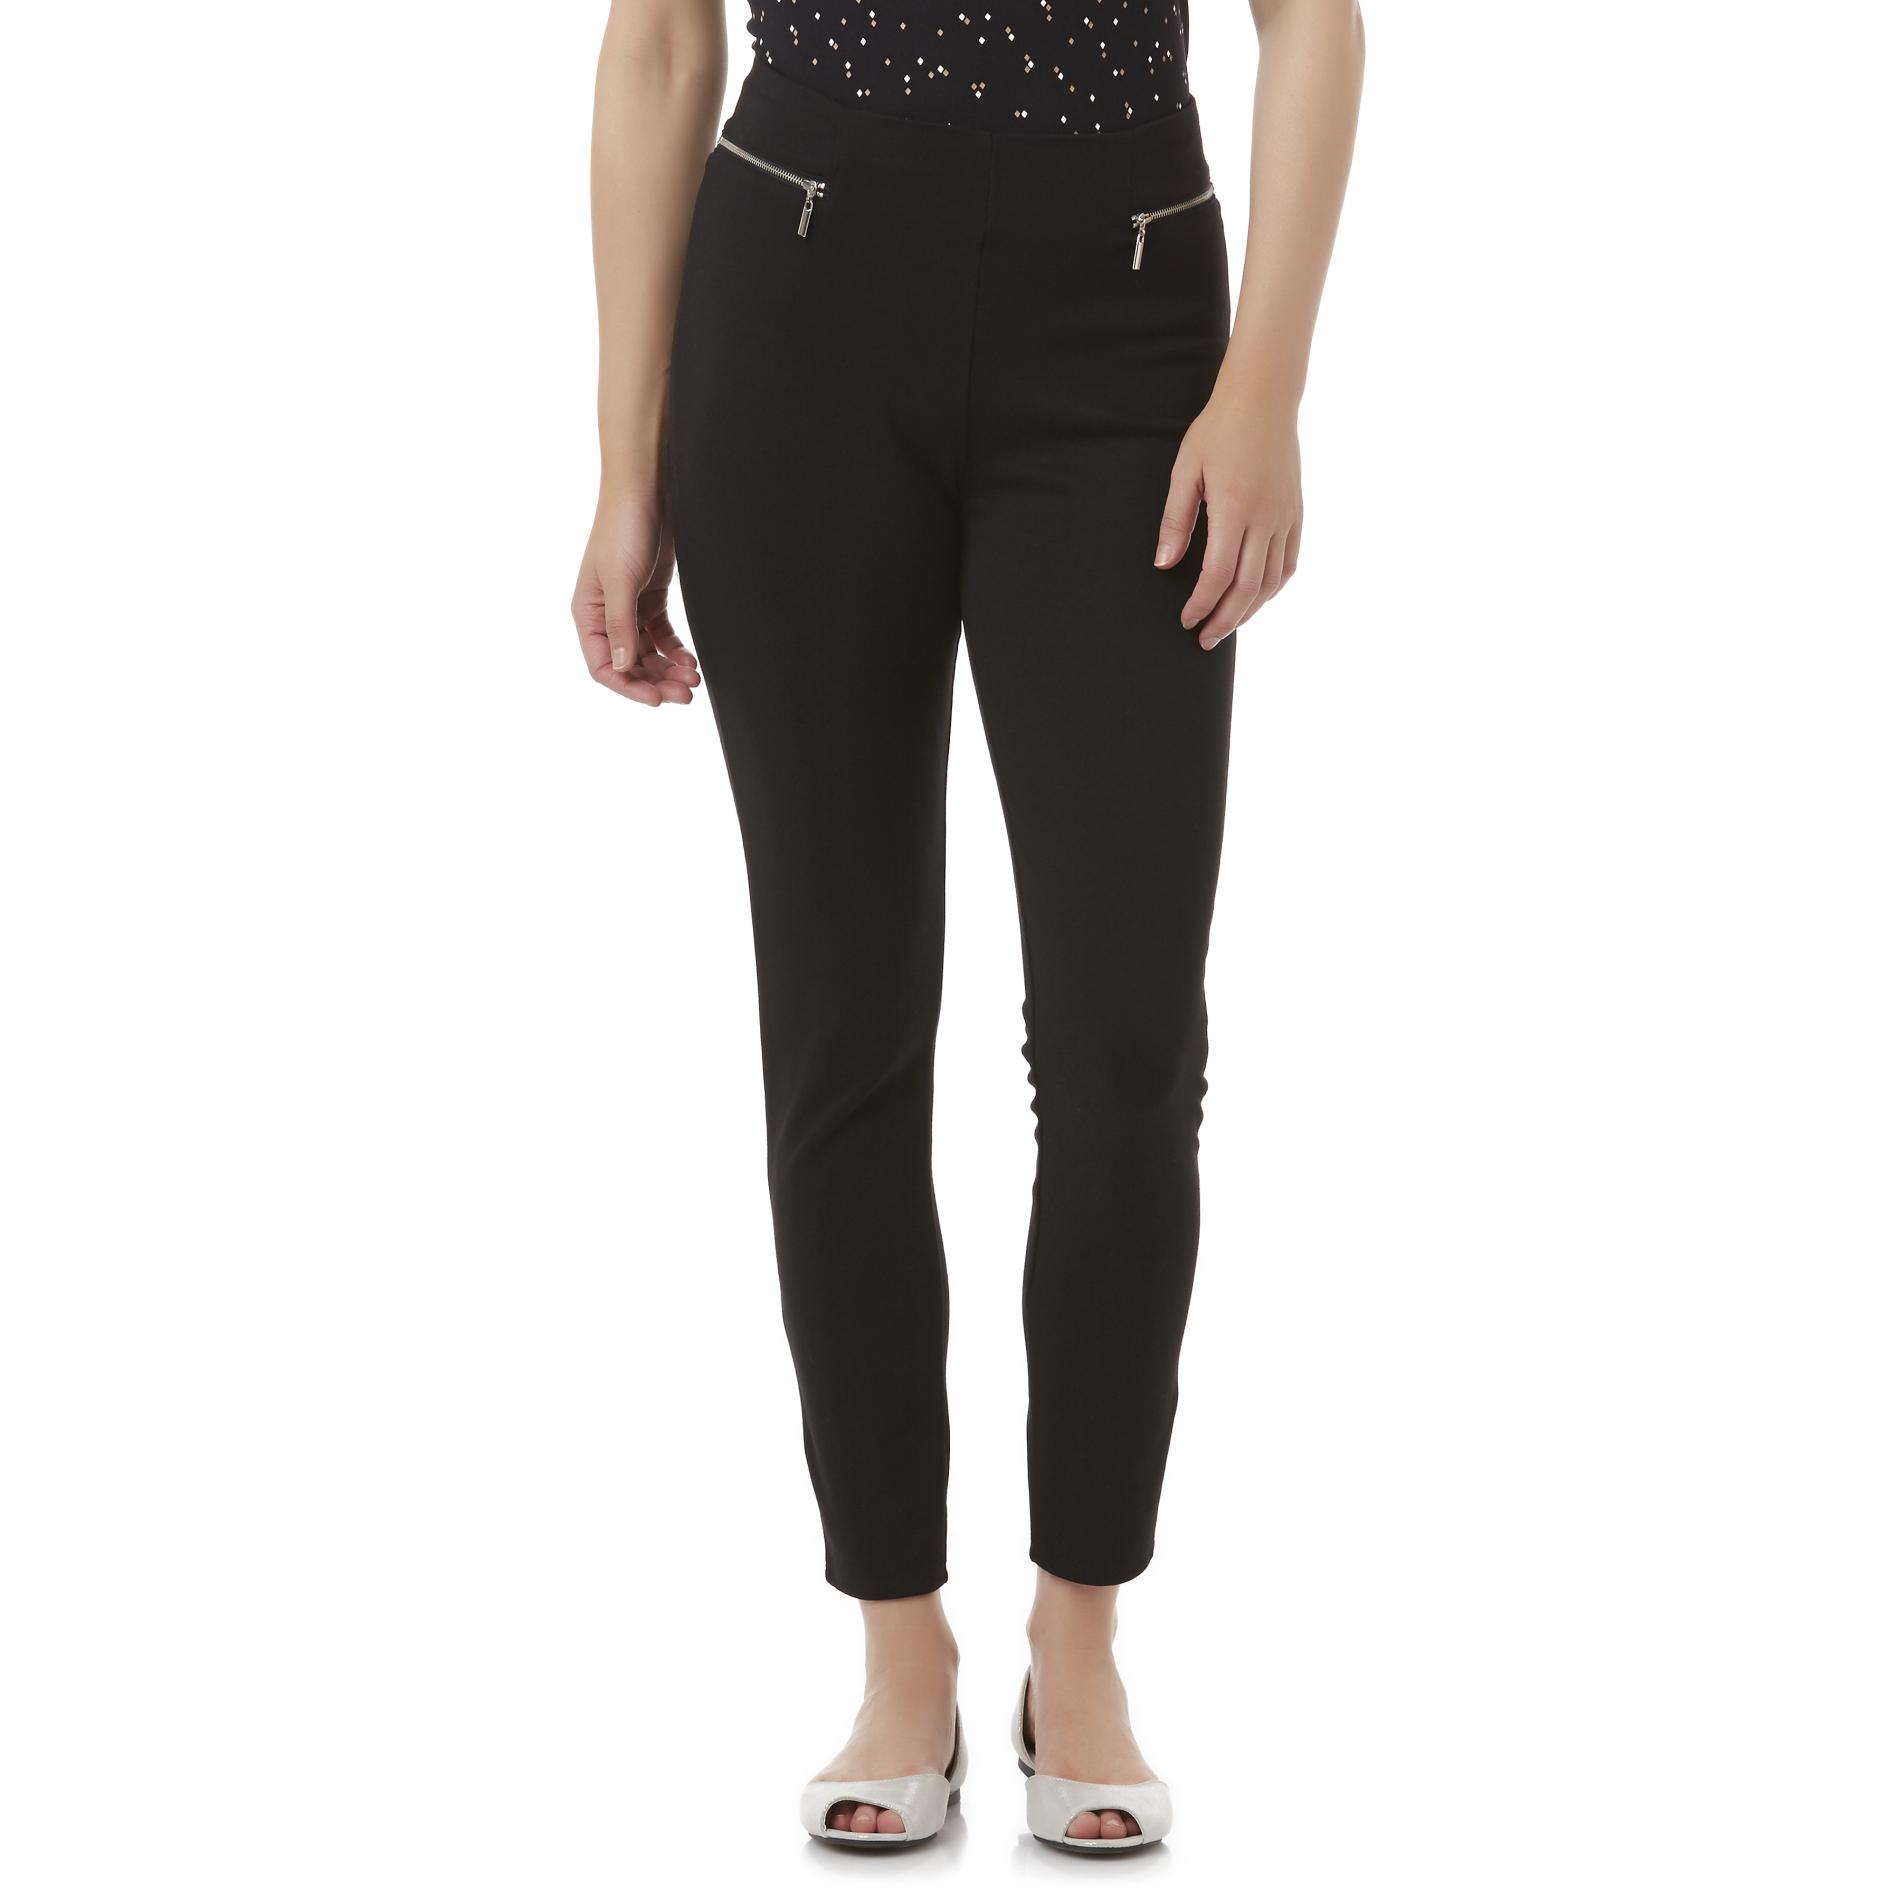 Simply Styled Women's Embellished Ponte Pants